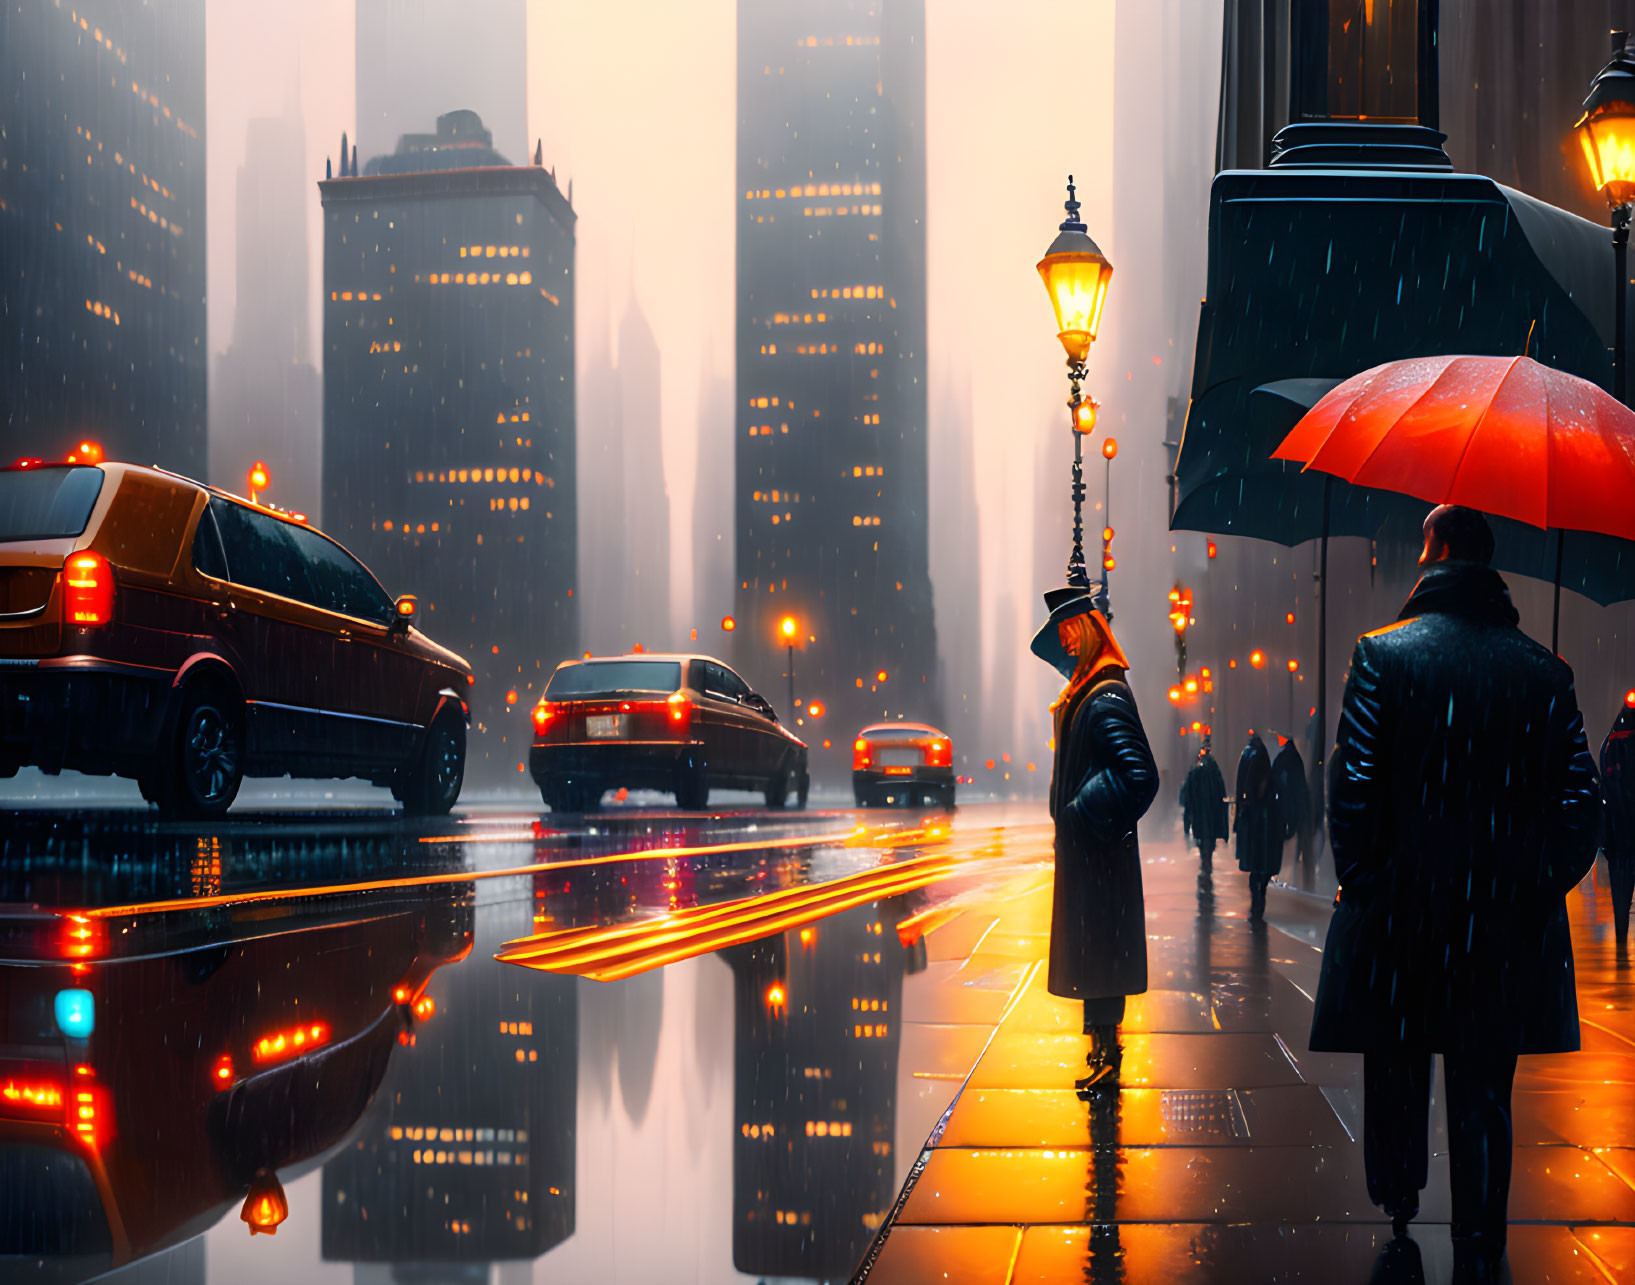 Rainy city street at dusk: Glowing street lights, wet pavement, cars, person with umbrella